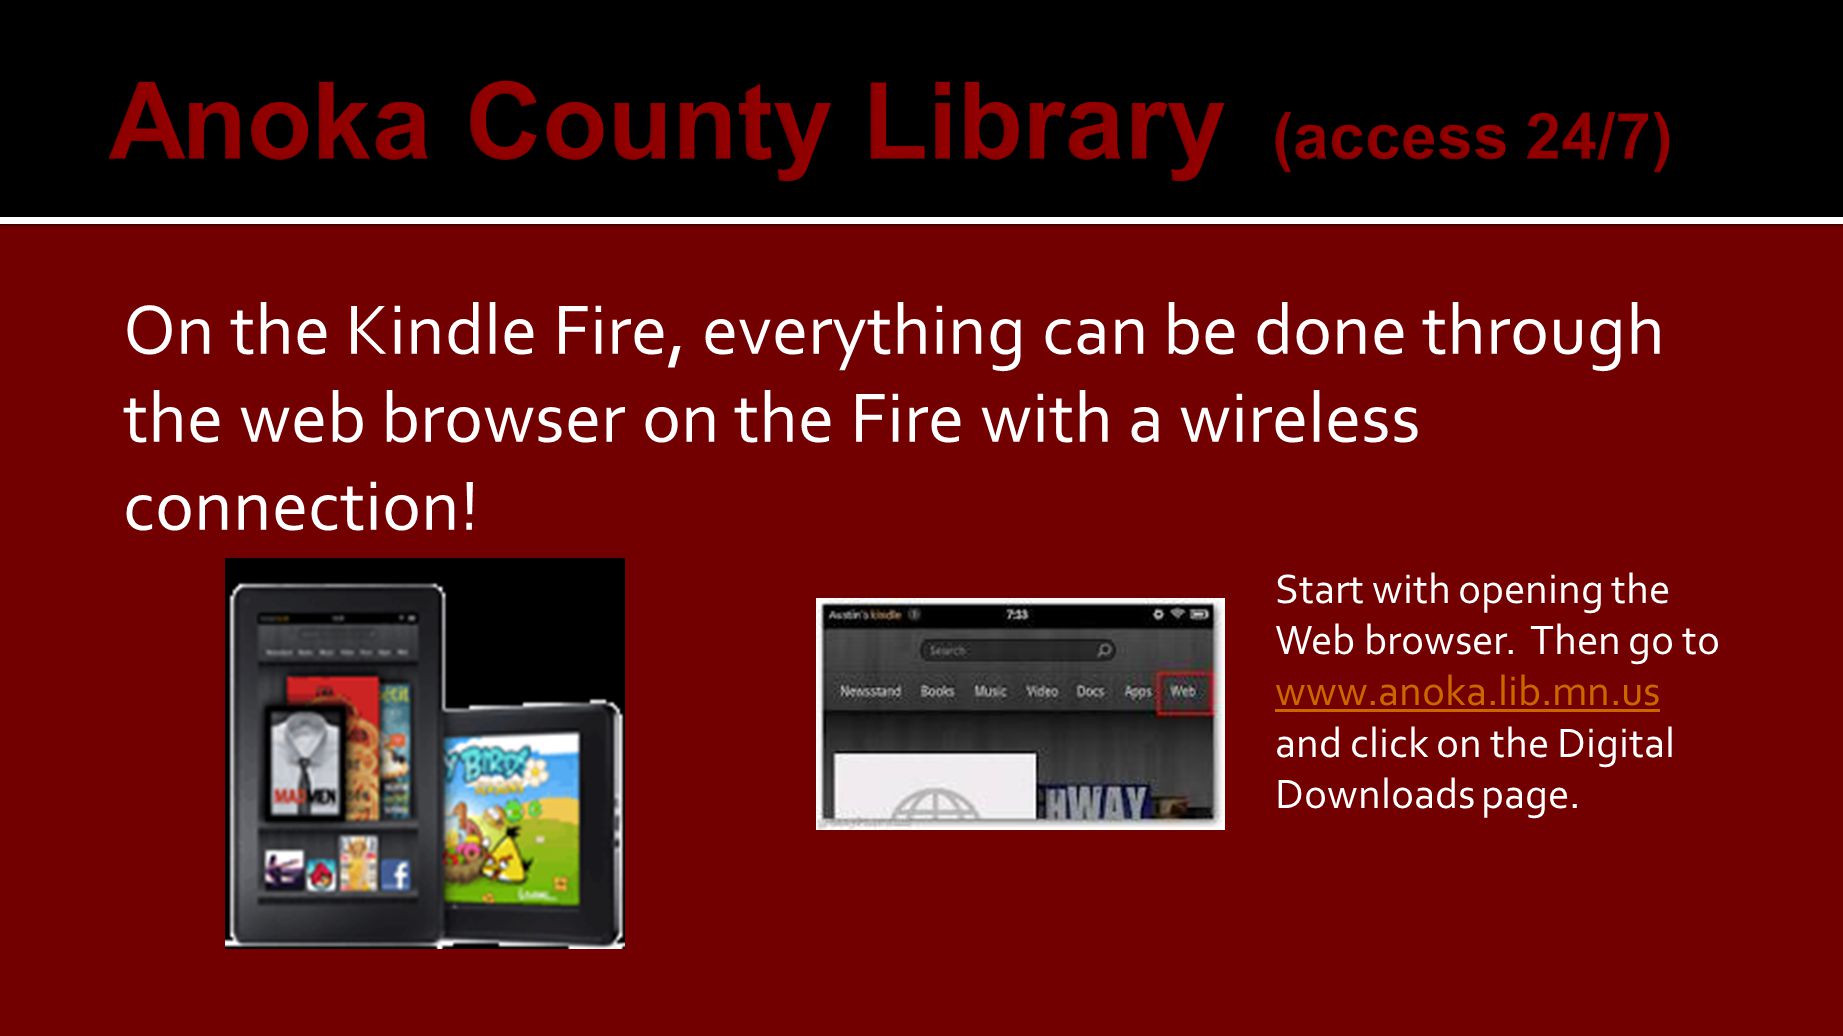 On the Kindle Fire, everything can be done through the web browser on the Fire with a wireless connection.